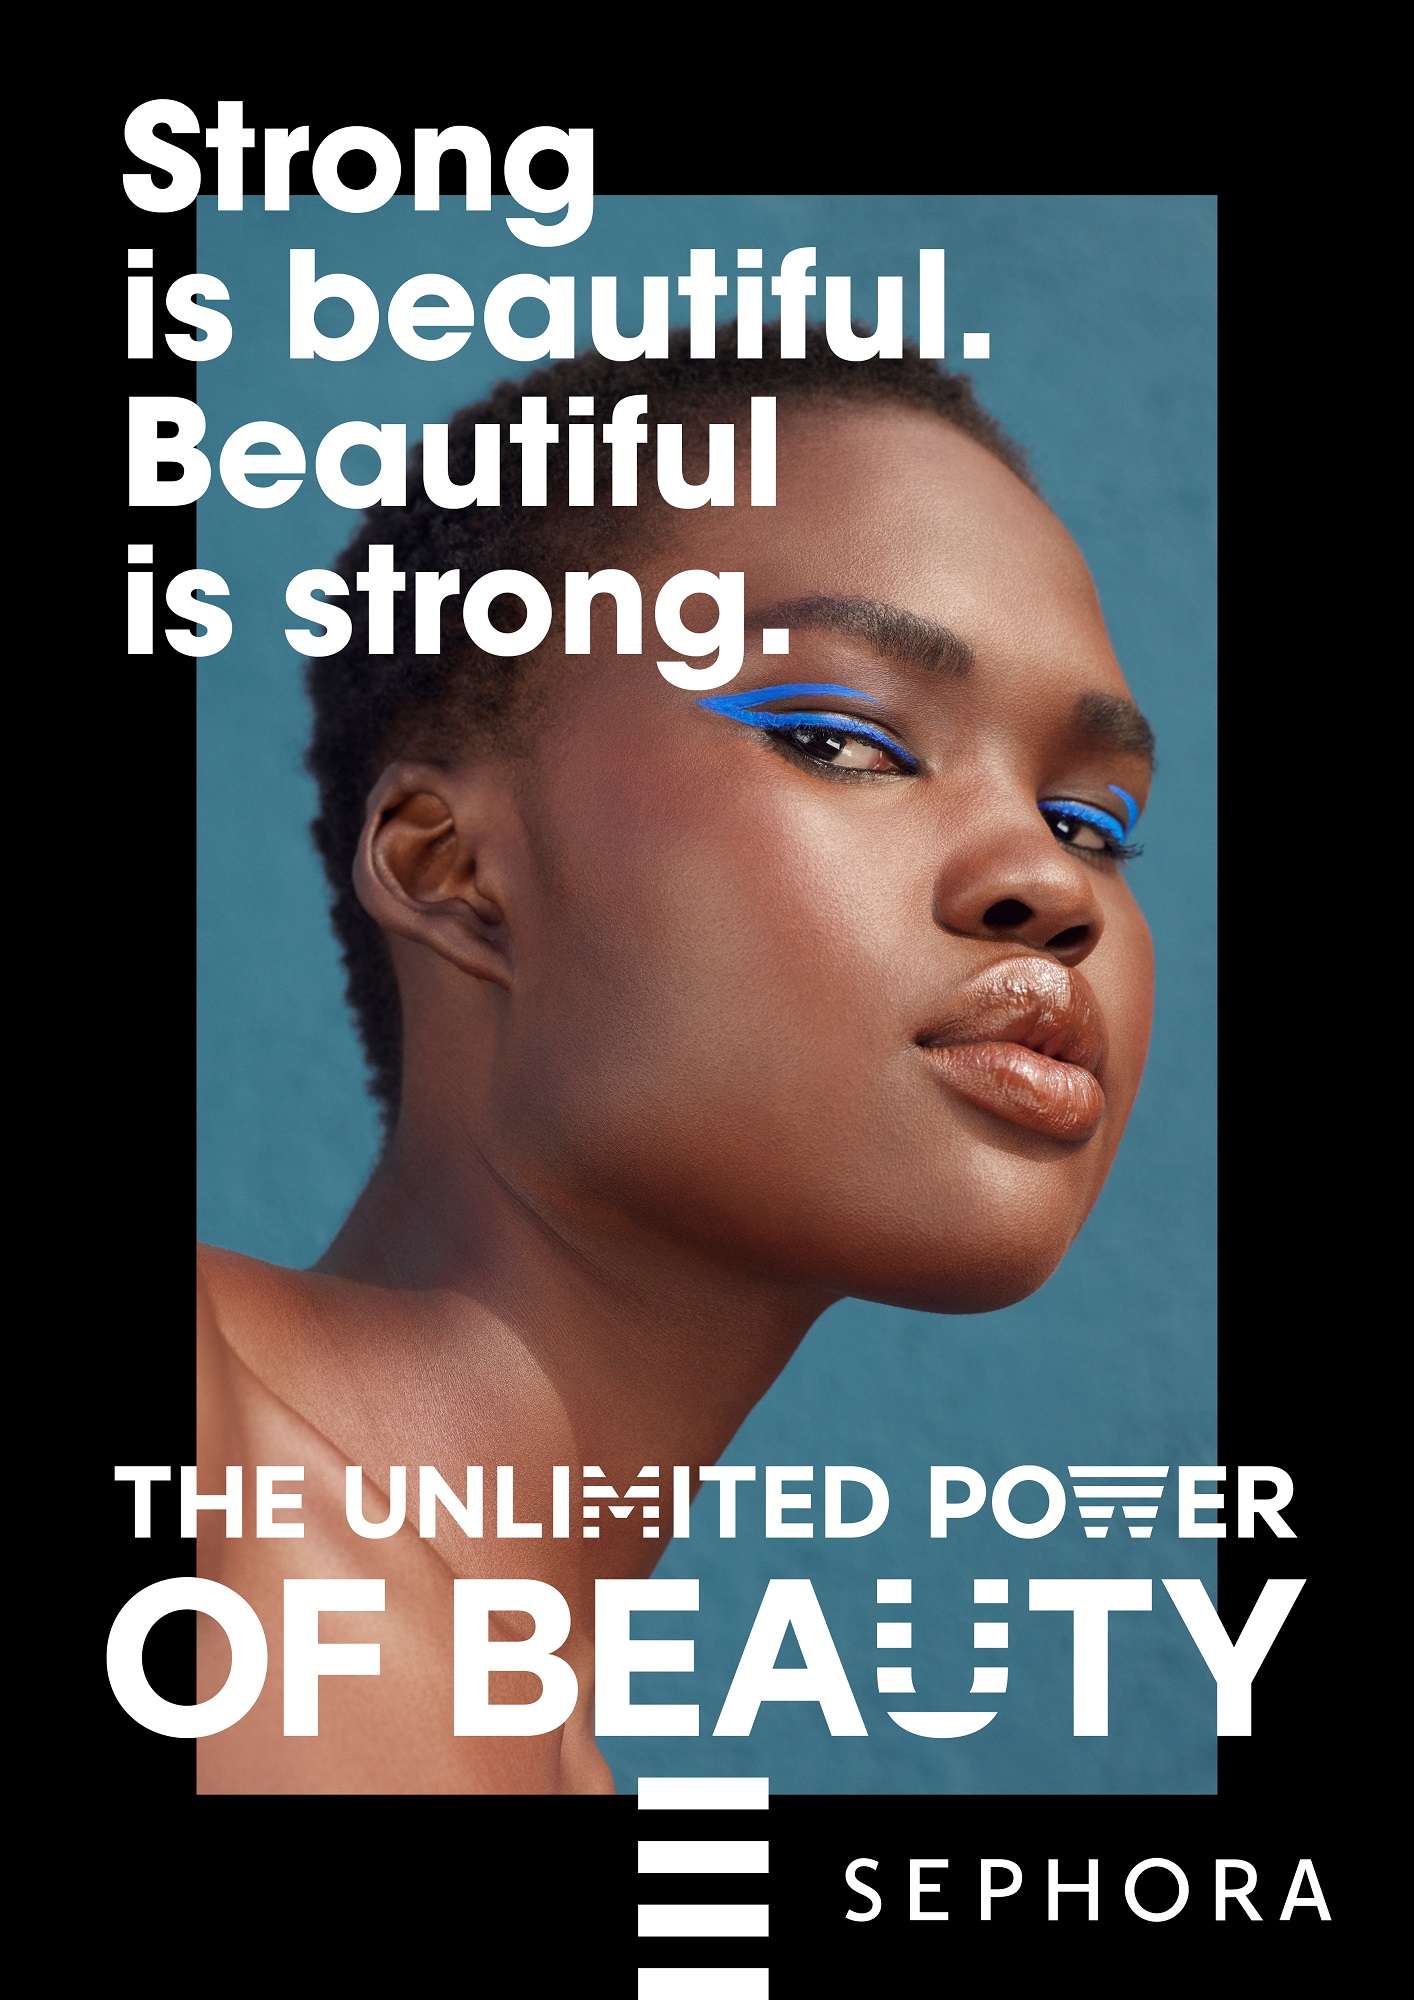 Sephora and BETC Paris Present "The Unlimited Power of Beauty"